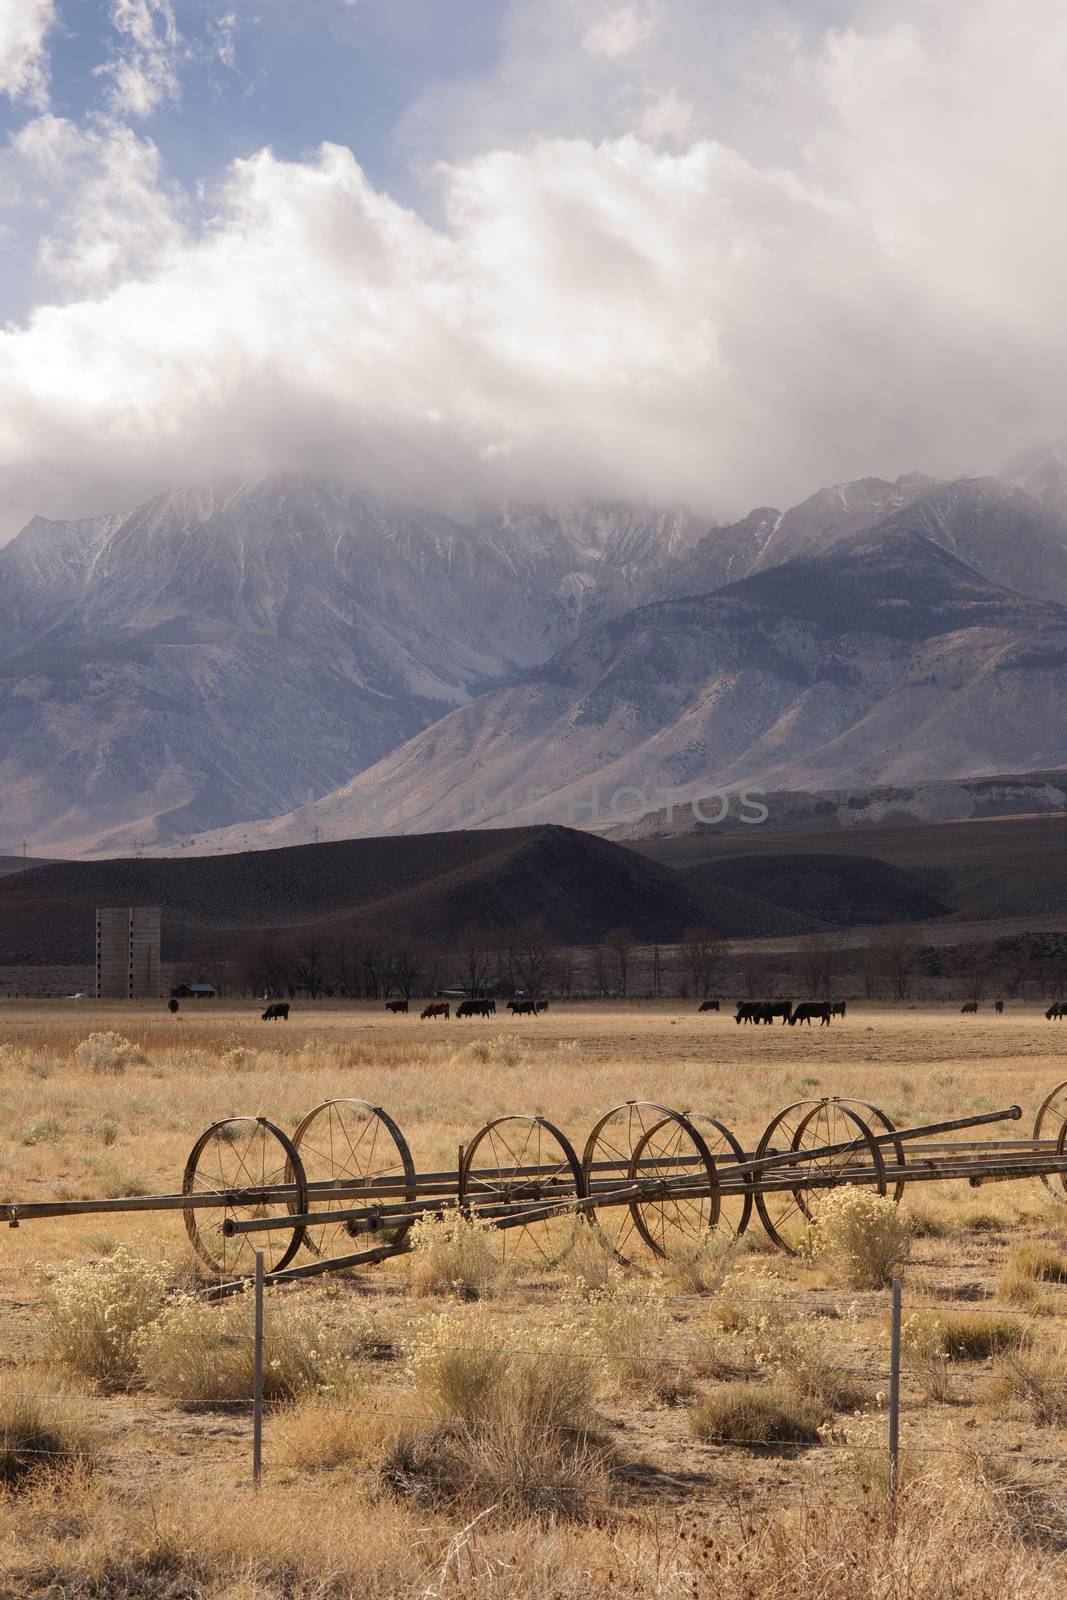 Cattle graze under a changing sky on this California Ranch